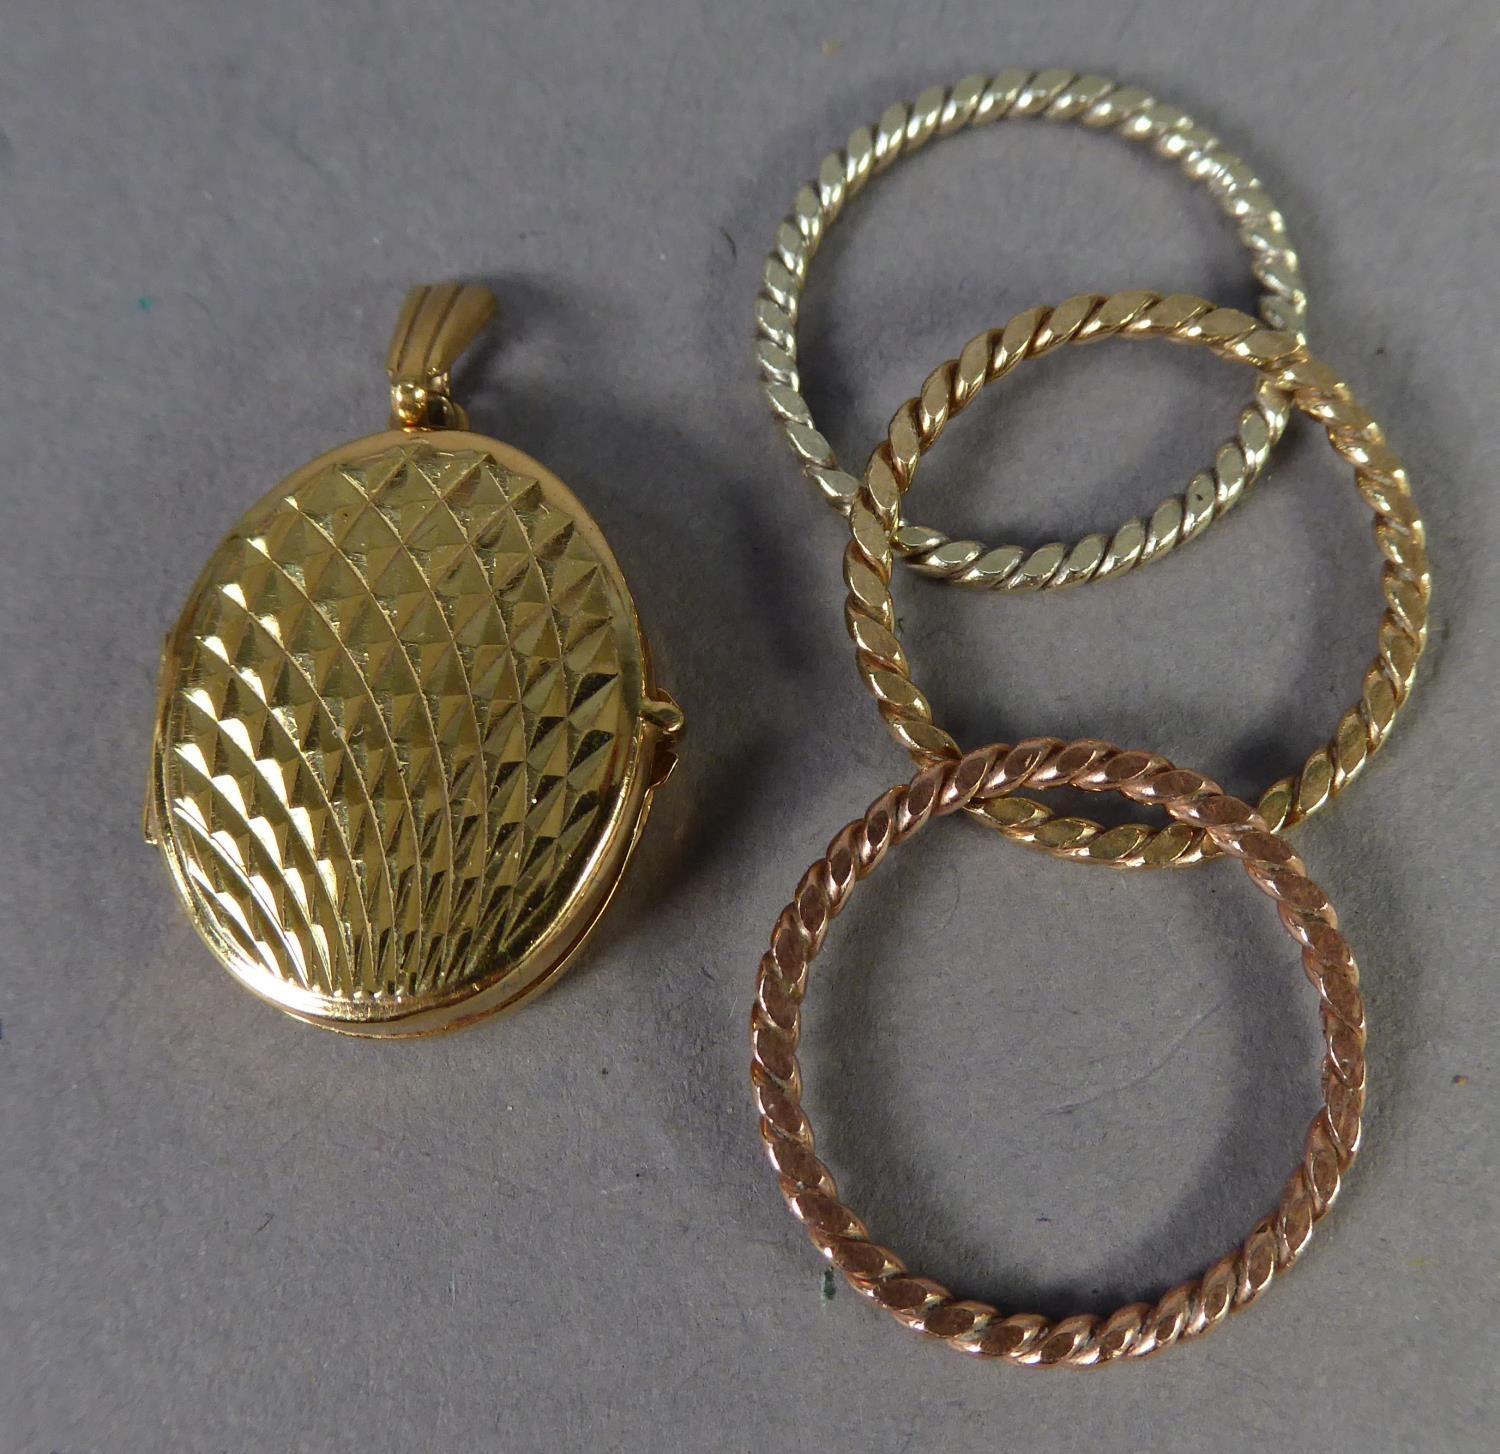 9ct GOLD SMALL OVAL LOCKET PENDANT with engine turned decoration and a set of THREE HALLMARKED 9ct - Image 2 of 2